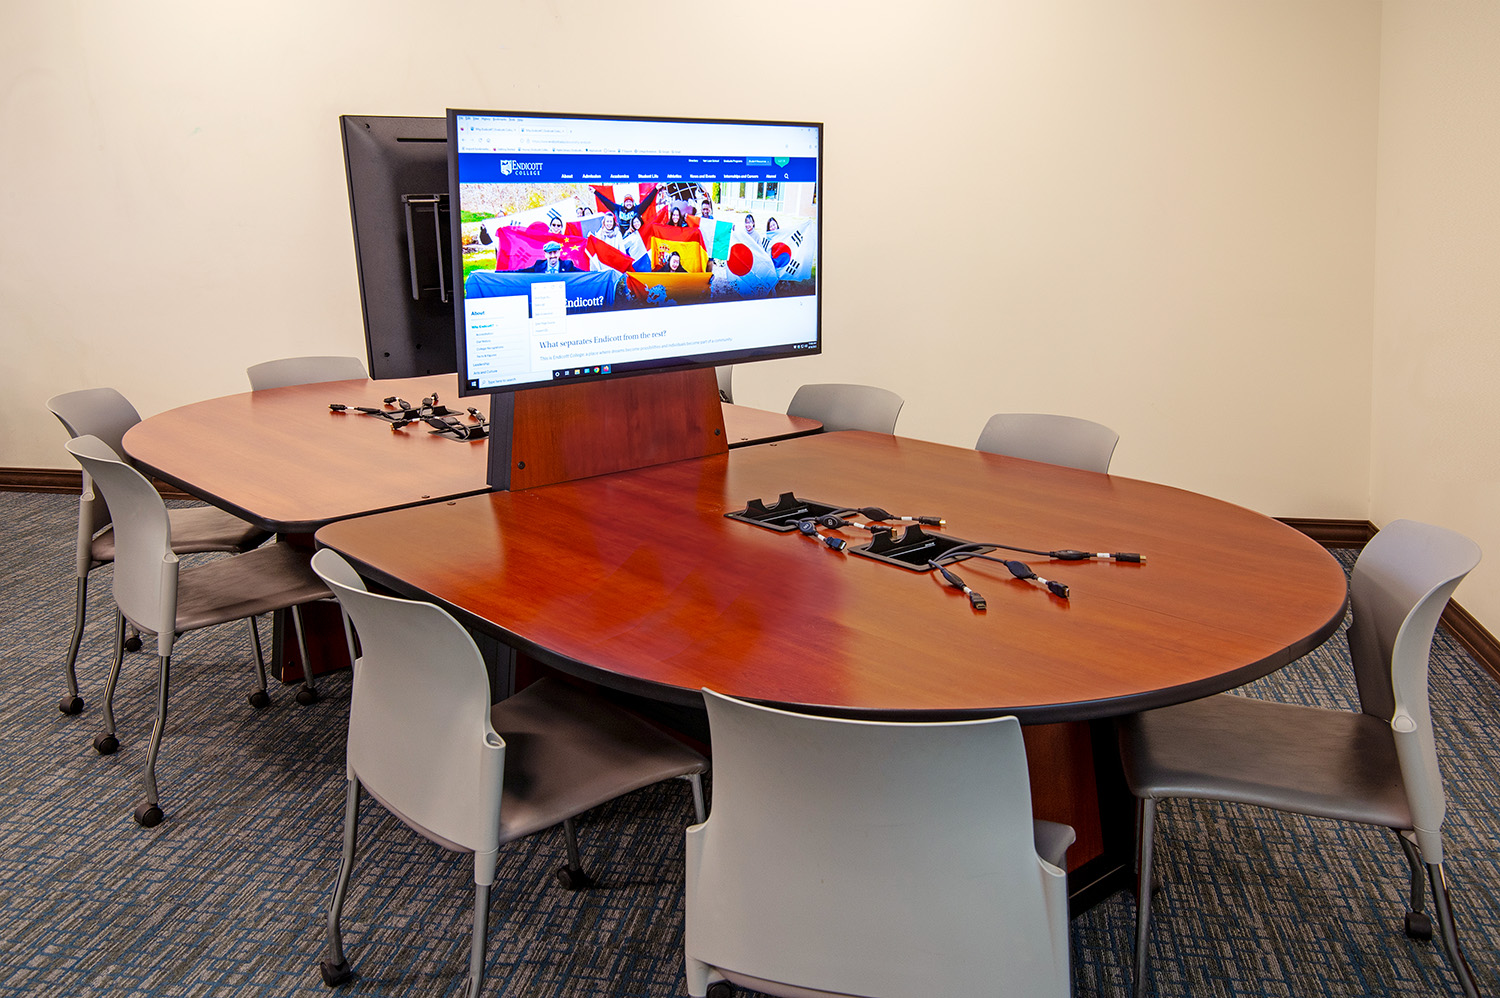 The new AV system supports eight collaboration tables, with two displays mounted back to back at each table to create two team stations.